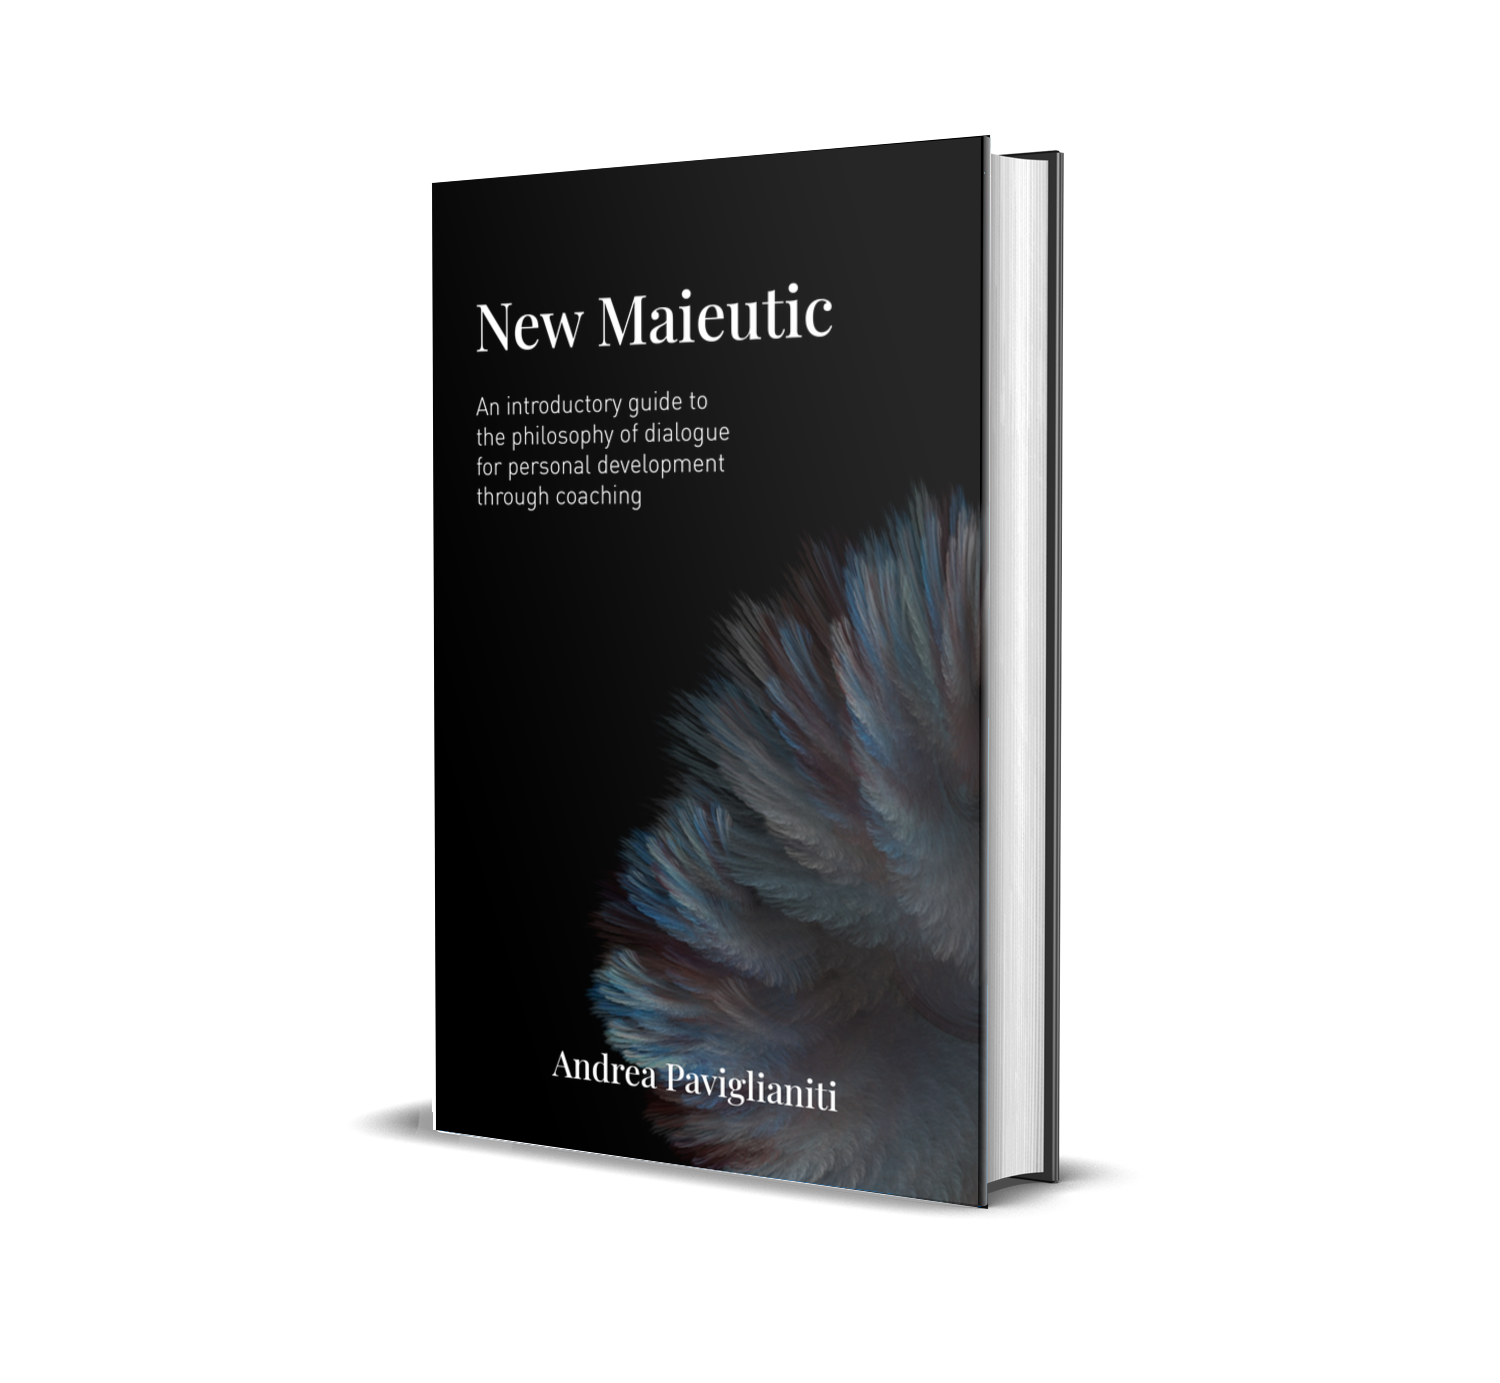 New Maieutic: An introductory guide to the philosophy of dialogue for personal development through coaching